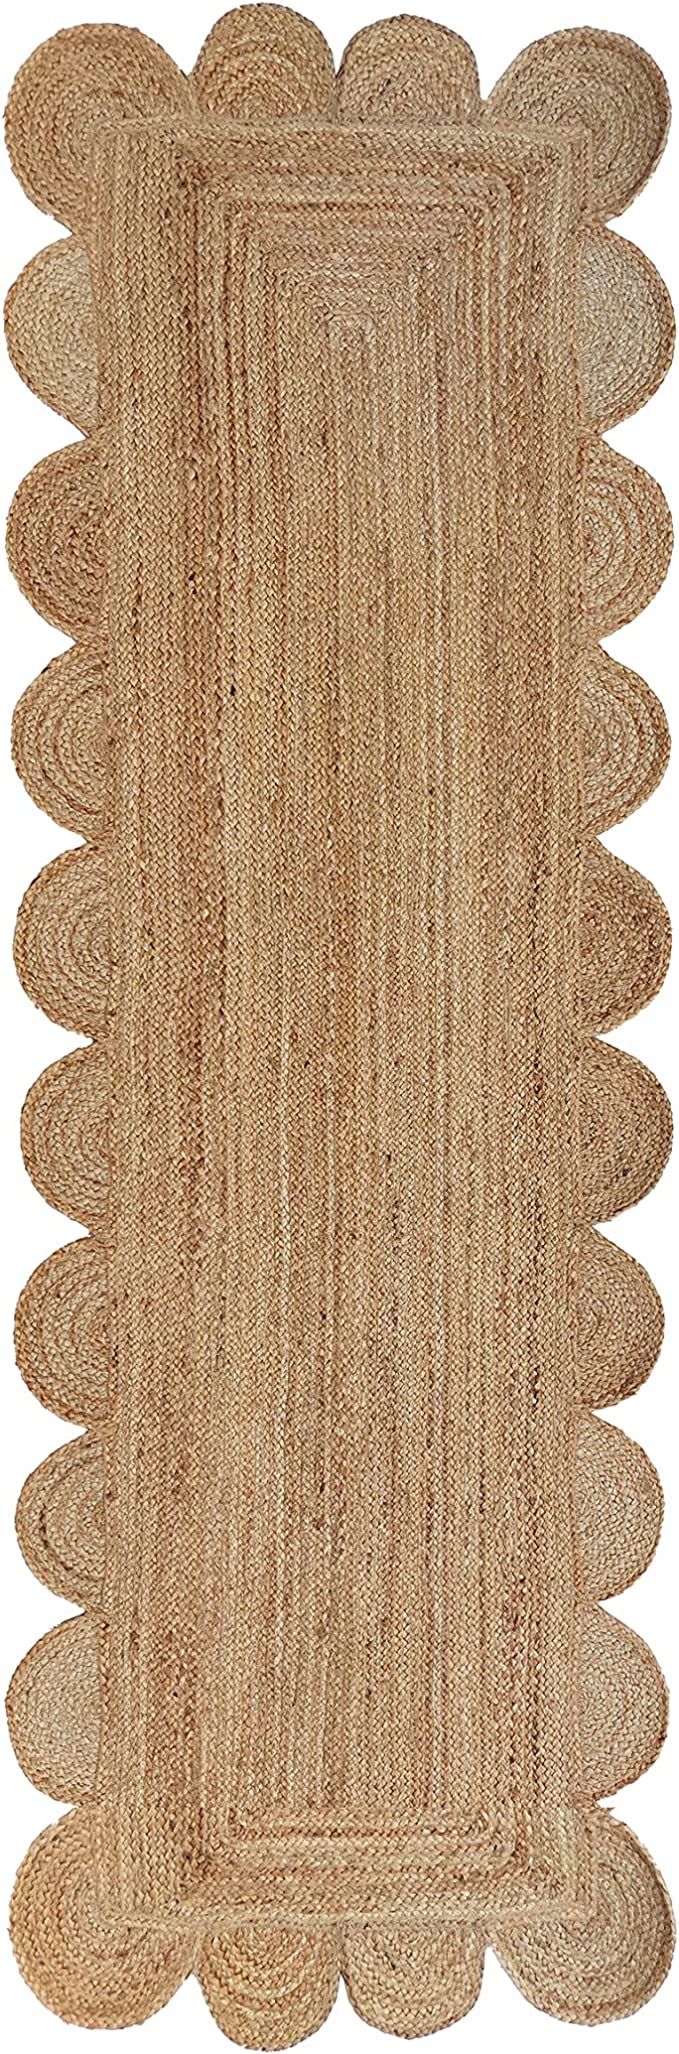 Scalloped Natural Jute Area Rug, Natural Color (2'6"X6') | Amazon (US)